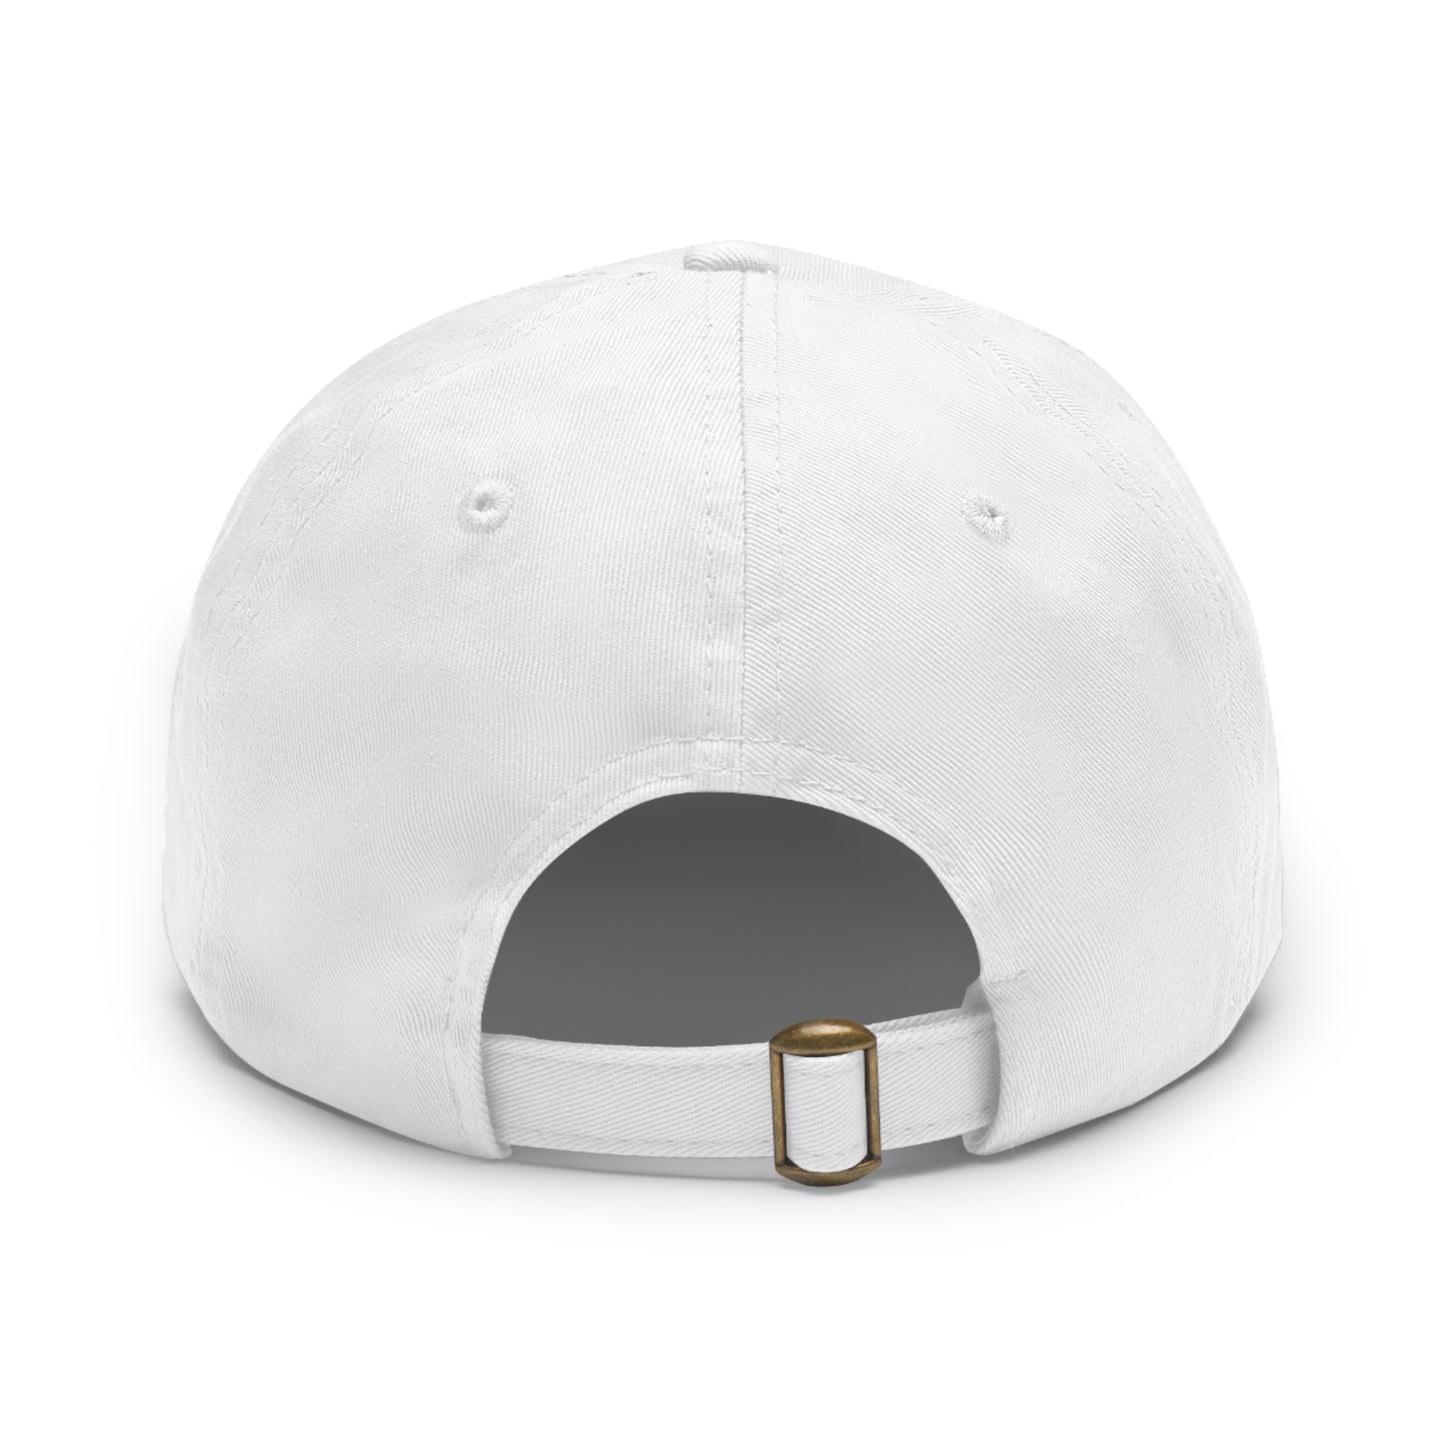 Best Dad Ever Dad Hat with Leather Patch (Rectangle)